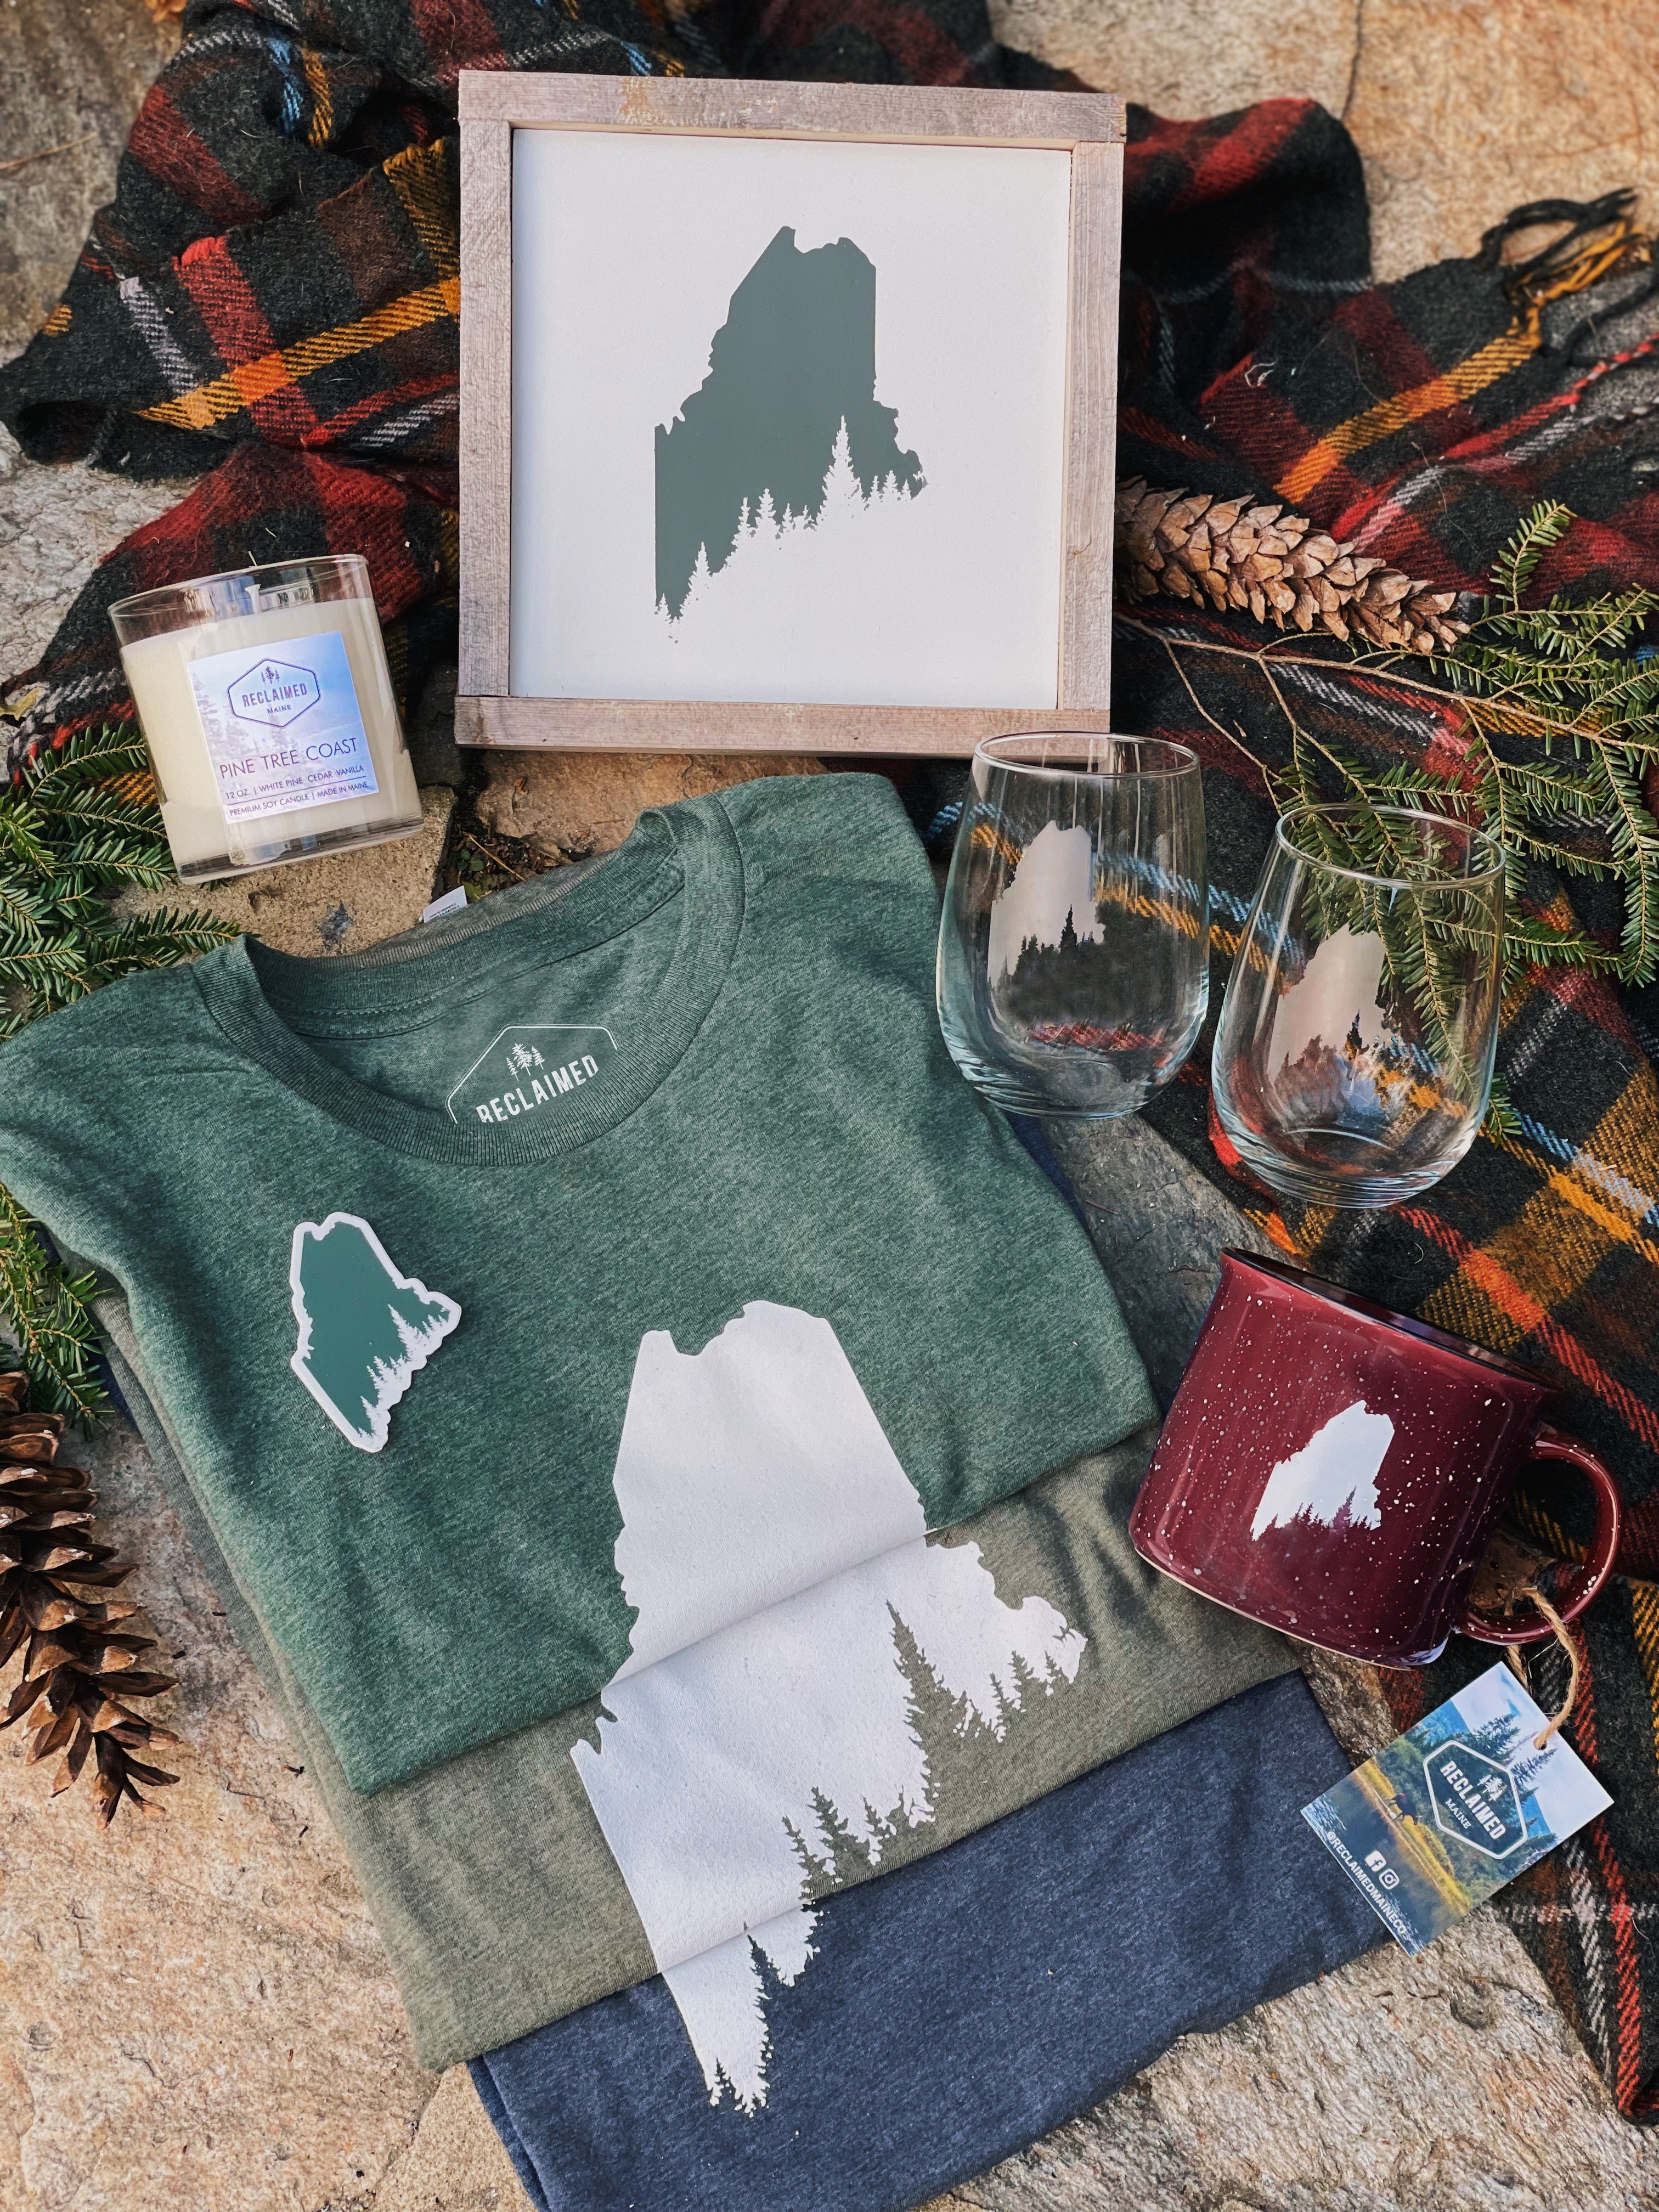 collection of tshirts, wood signs, glasses, mugs and candle with Maine pine tree coast design